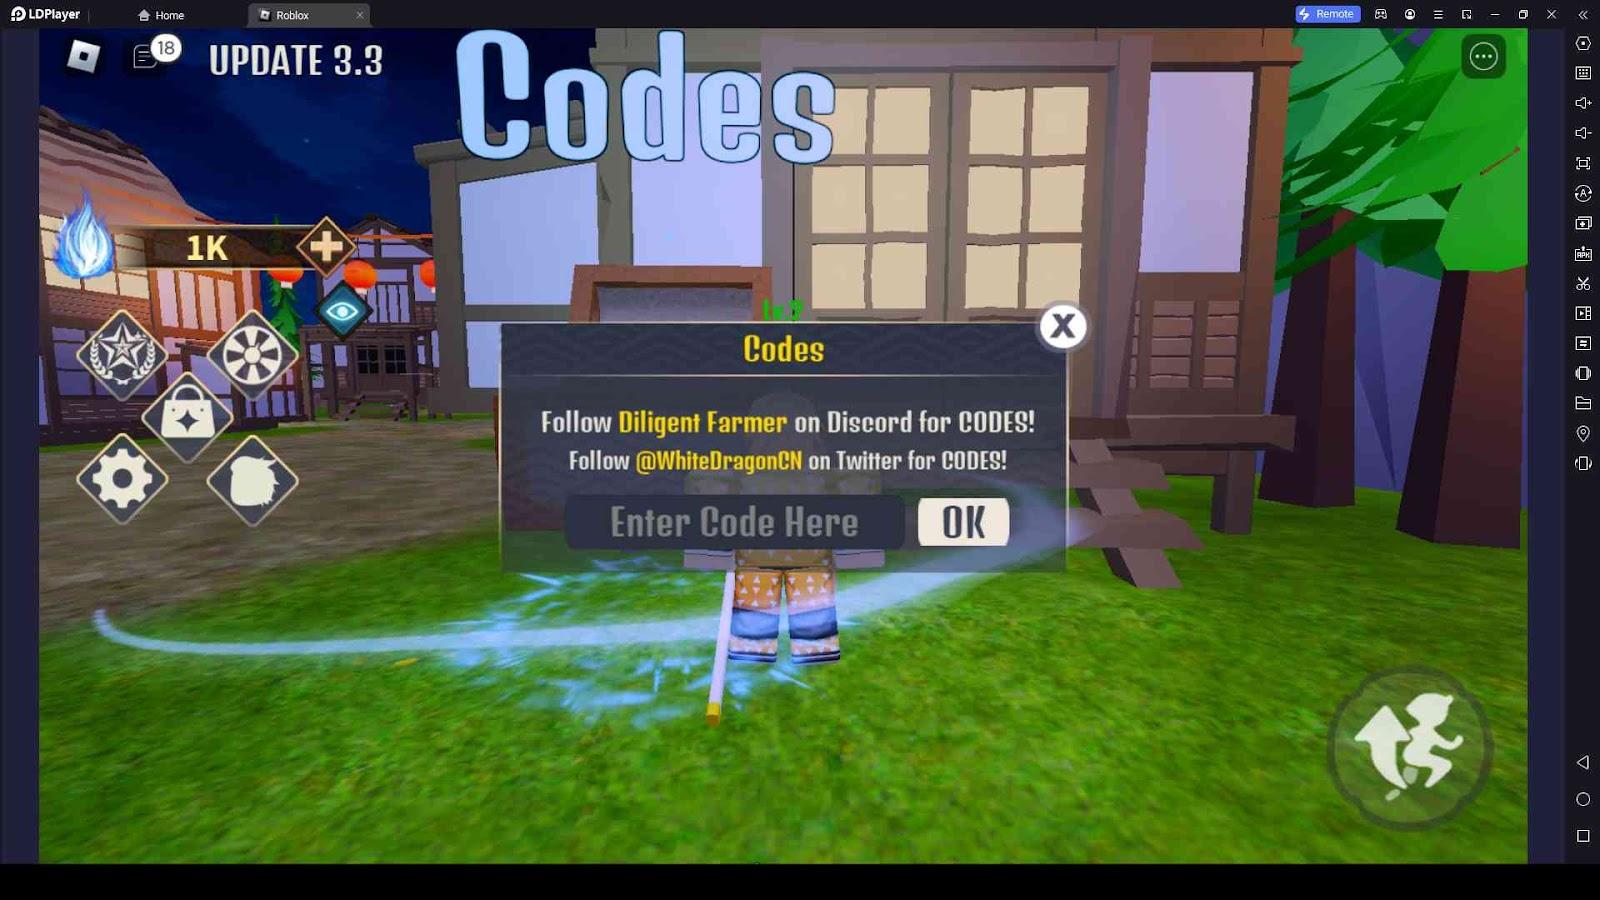 Roblox Demon Soul Codes: Chase Down Demons and Reap Souls - 2023